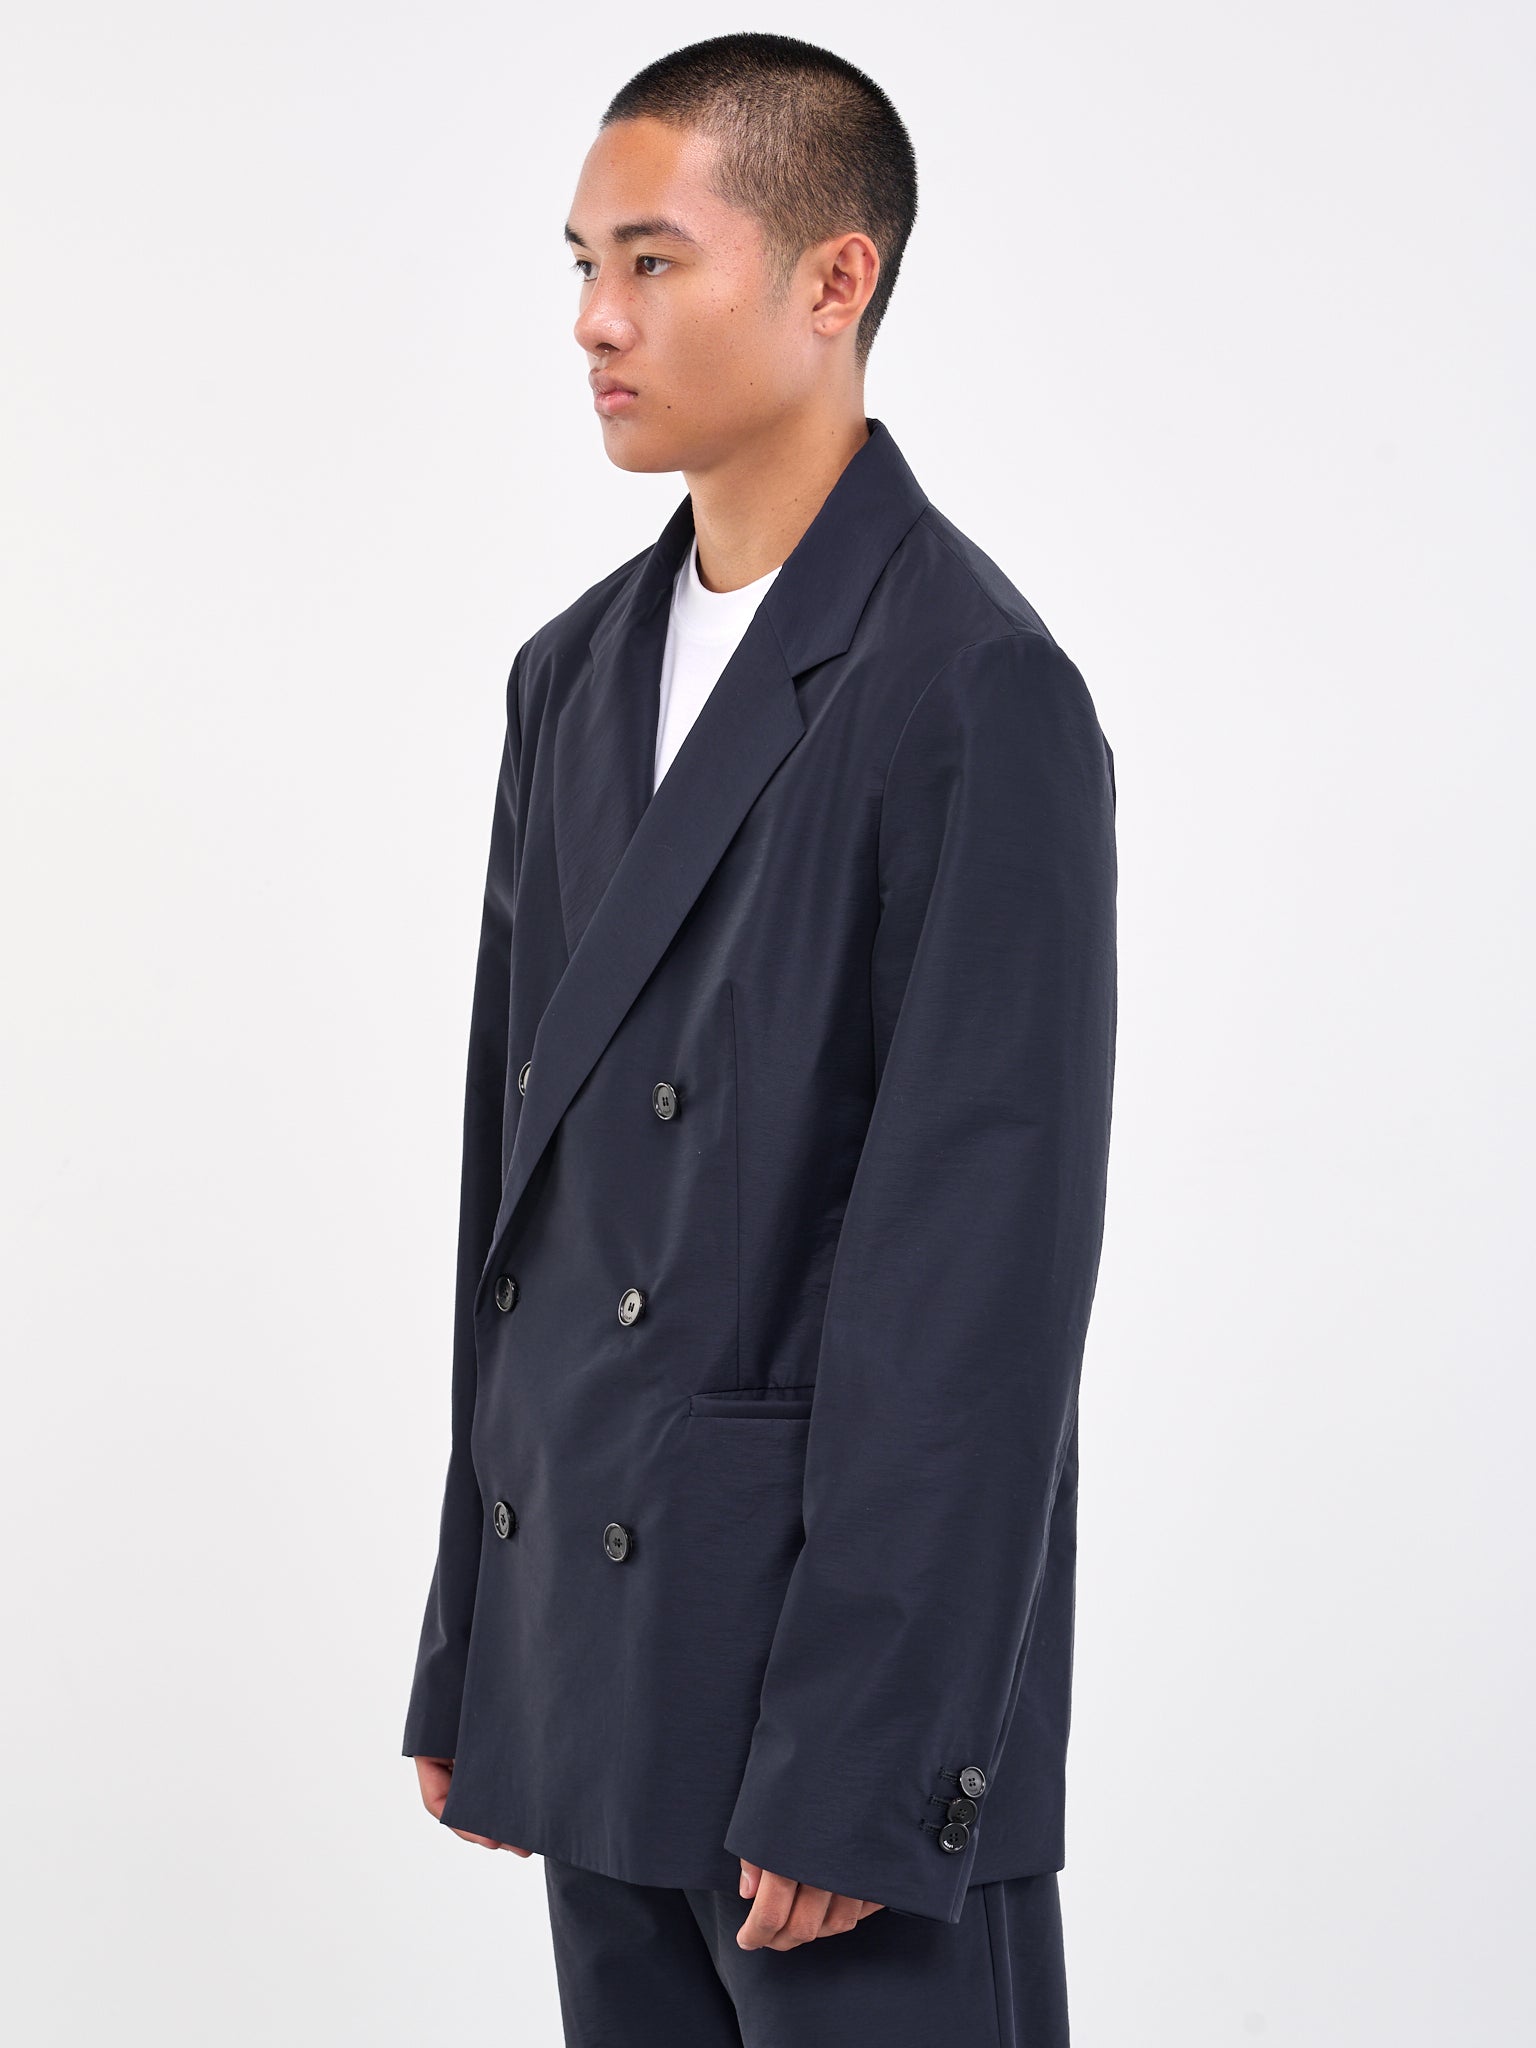 Technical Wool Suit Jacket HYW MIDNIGHT BLUE